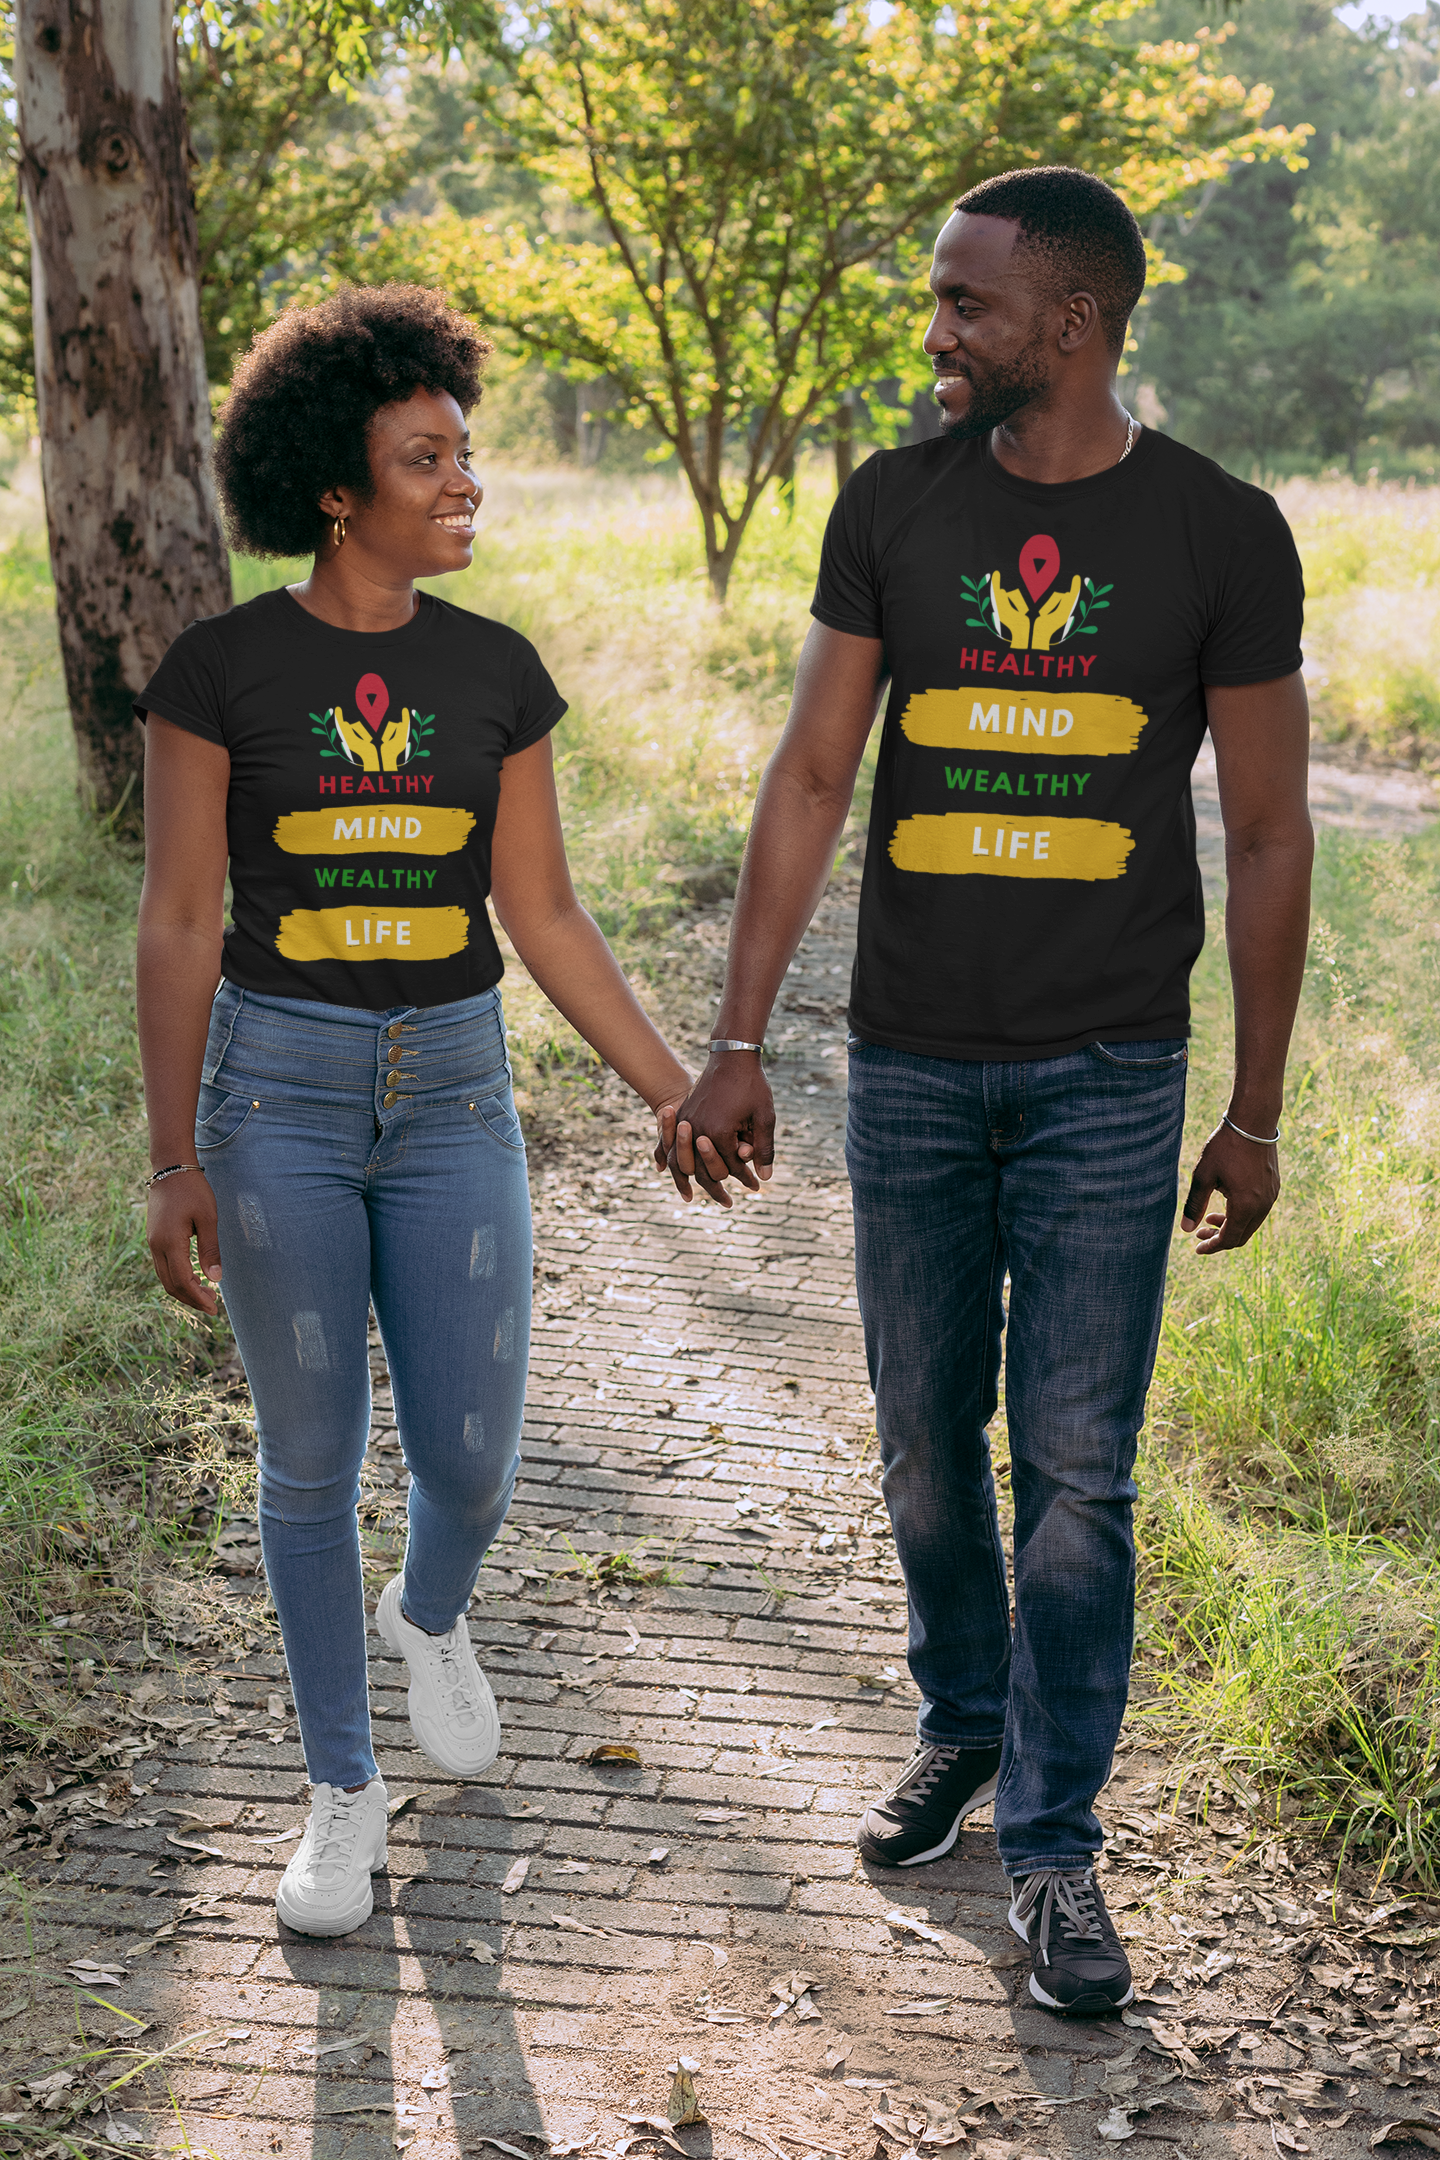 Healthy Mind Wealthy Life Unisex Softstyle T-Shirt by Guyanese Swag